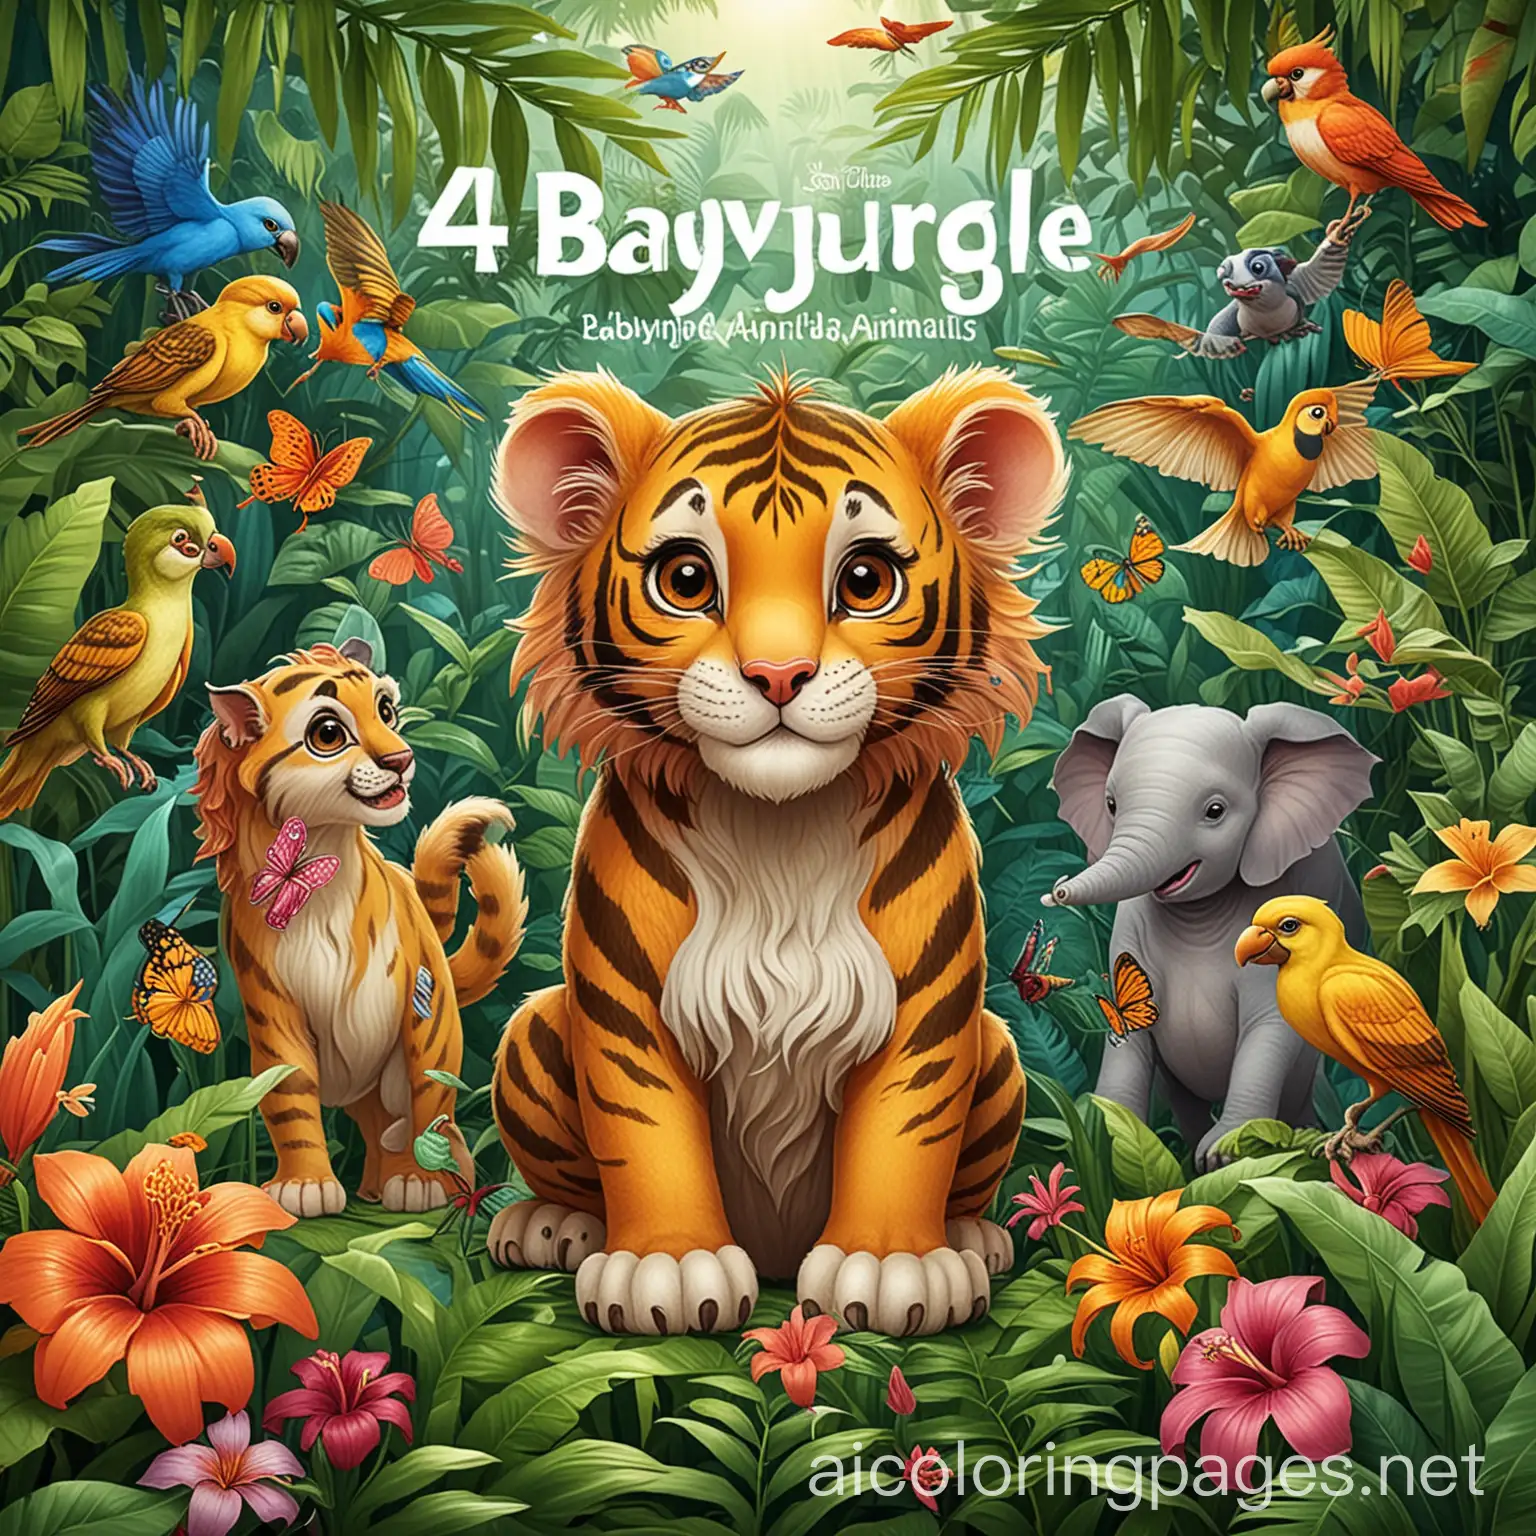 Create a colorful and detailed cover for a children's coloring book titled '42 Baby Jungle Animals'. The cover should feature an array of adorable baby jungle animals, similar in style to the provided image. Include a variety of animals such as a baby tiger, elephant, monkey, parrot, iguana, owl, and frog, among others. Ensure each animal has a cute and friendly expression, surrounded by lush tropical foliage and vibrant flowers. The title '42 Baby Jungle Animals' should be prominently displayed in a playful and eye-catching font in the center of the cover. full of vibrant eye catching colors.





, Coloring Page, black and white, line art, white background, Simplicity, Ample White Space. The background of the coloring page is plain white to make it easy for young children to color within the lines. The outlines of all the subjects are easy to distinguish, making it simple for kids to color without too much difficulty